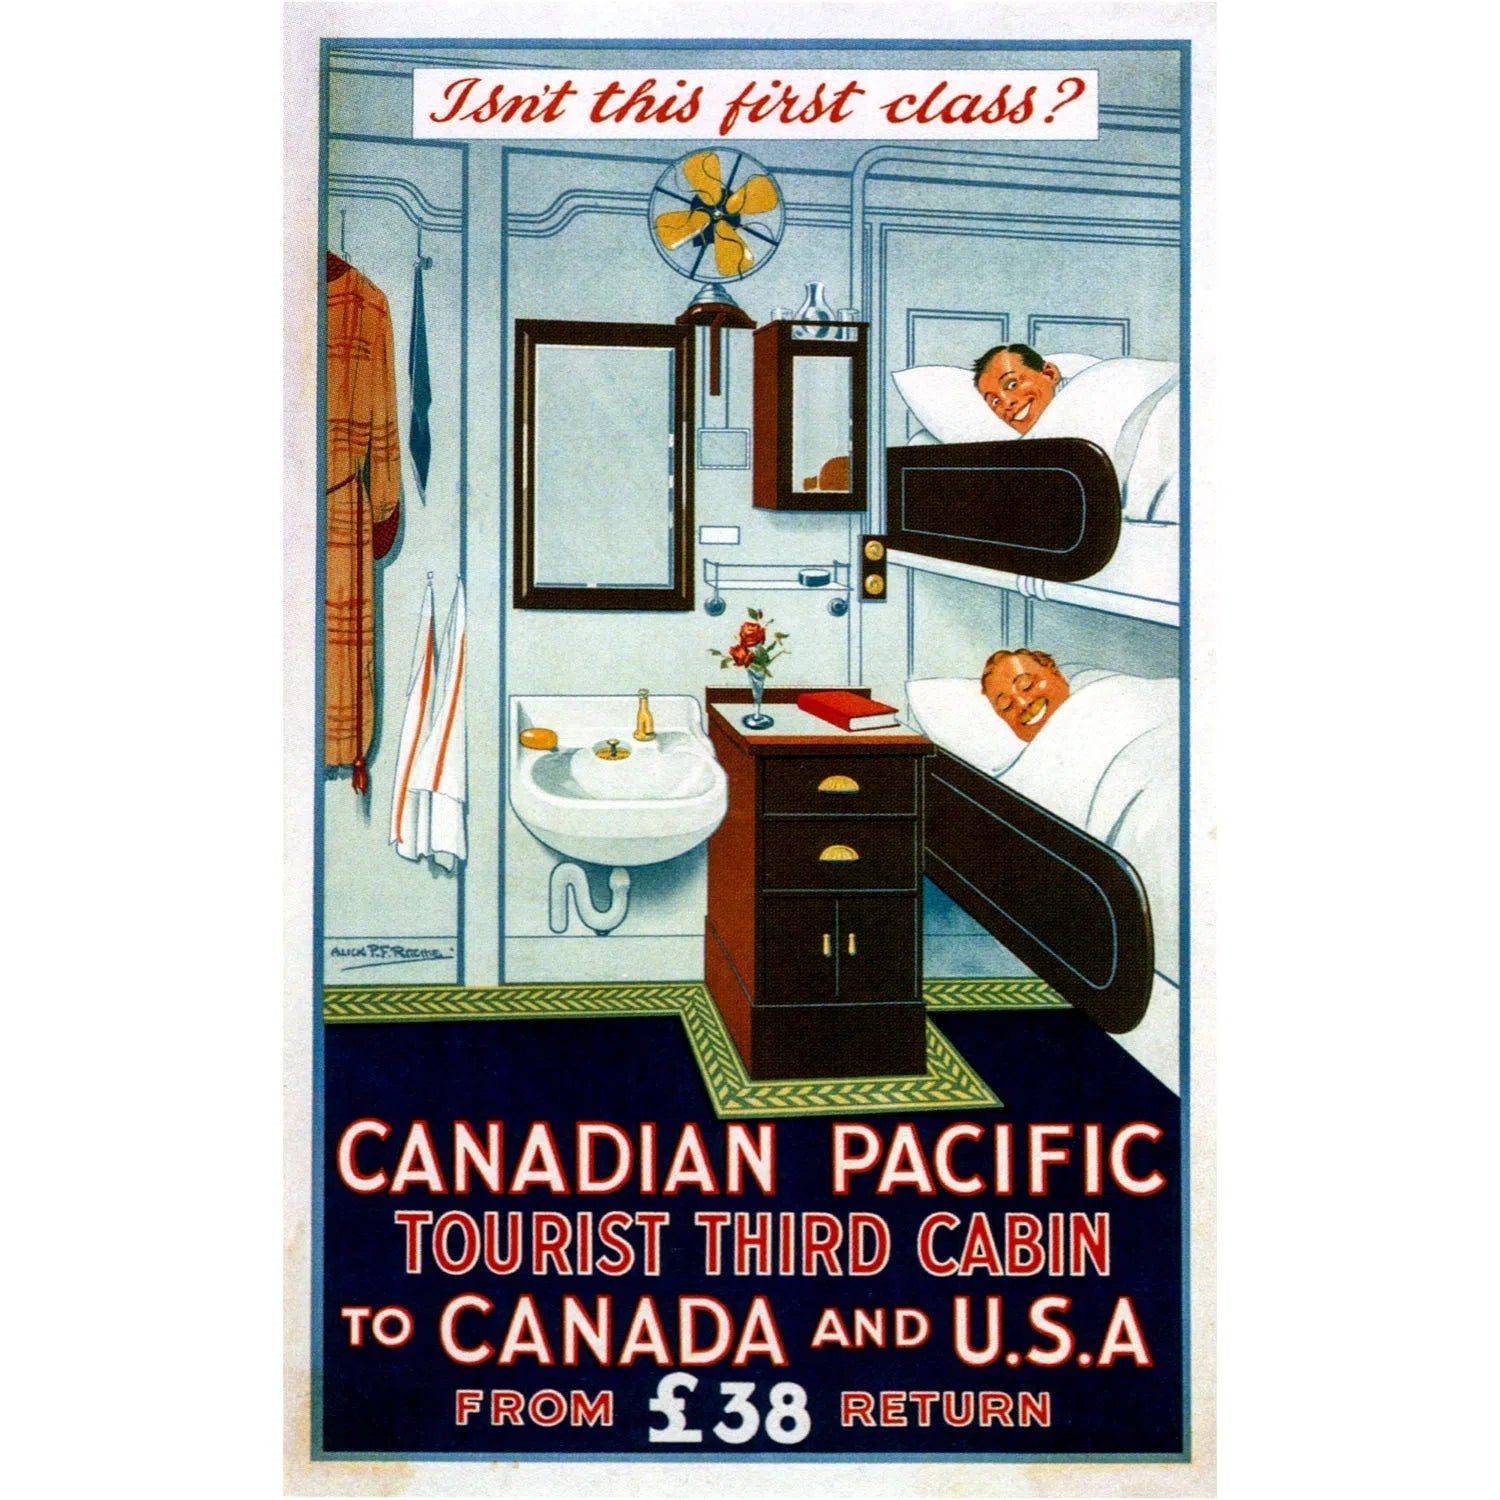 Isn't this first class ? - Canadian pacific-Imagesdartistes